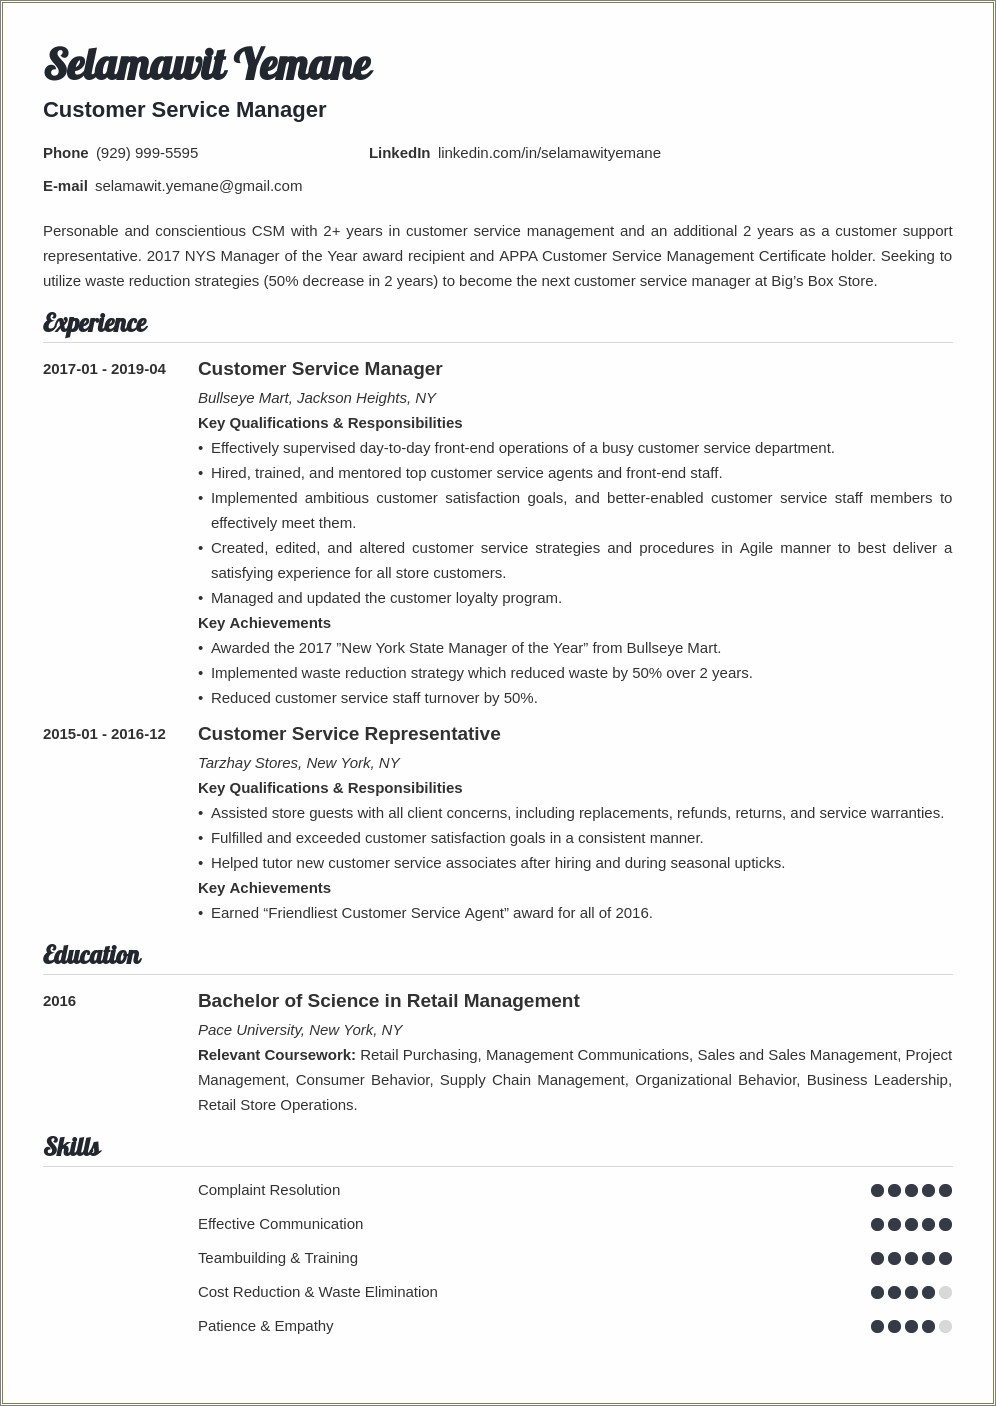 Call Center Team Leader Resume Examples